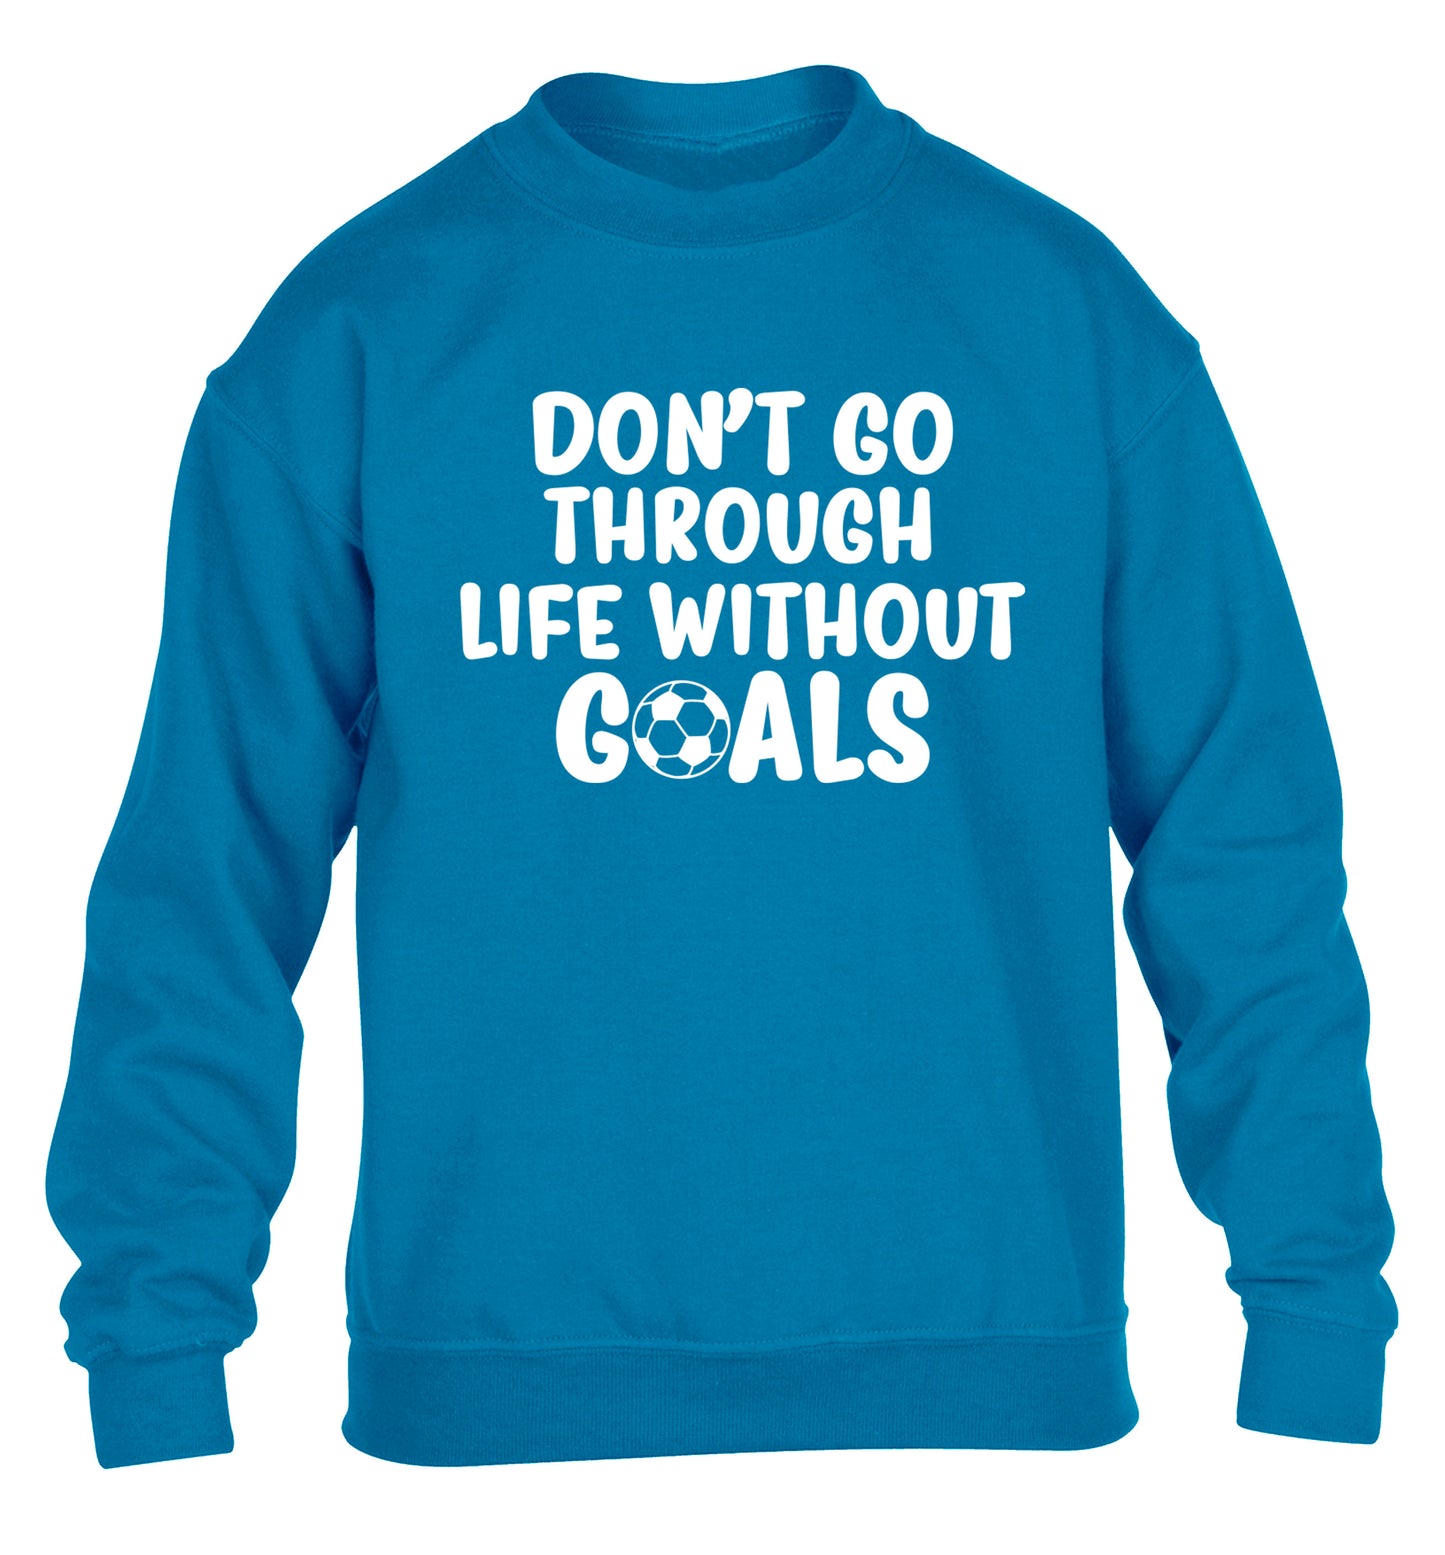 Don't go through life without goals children's blue sweater 12-14 Years